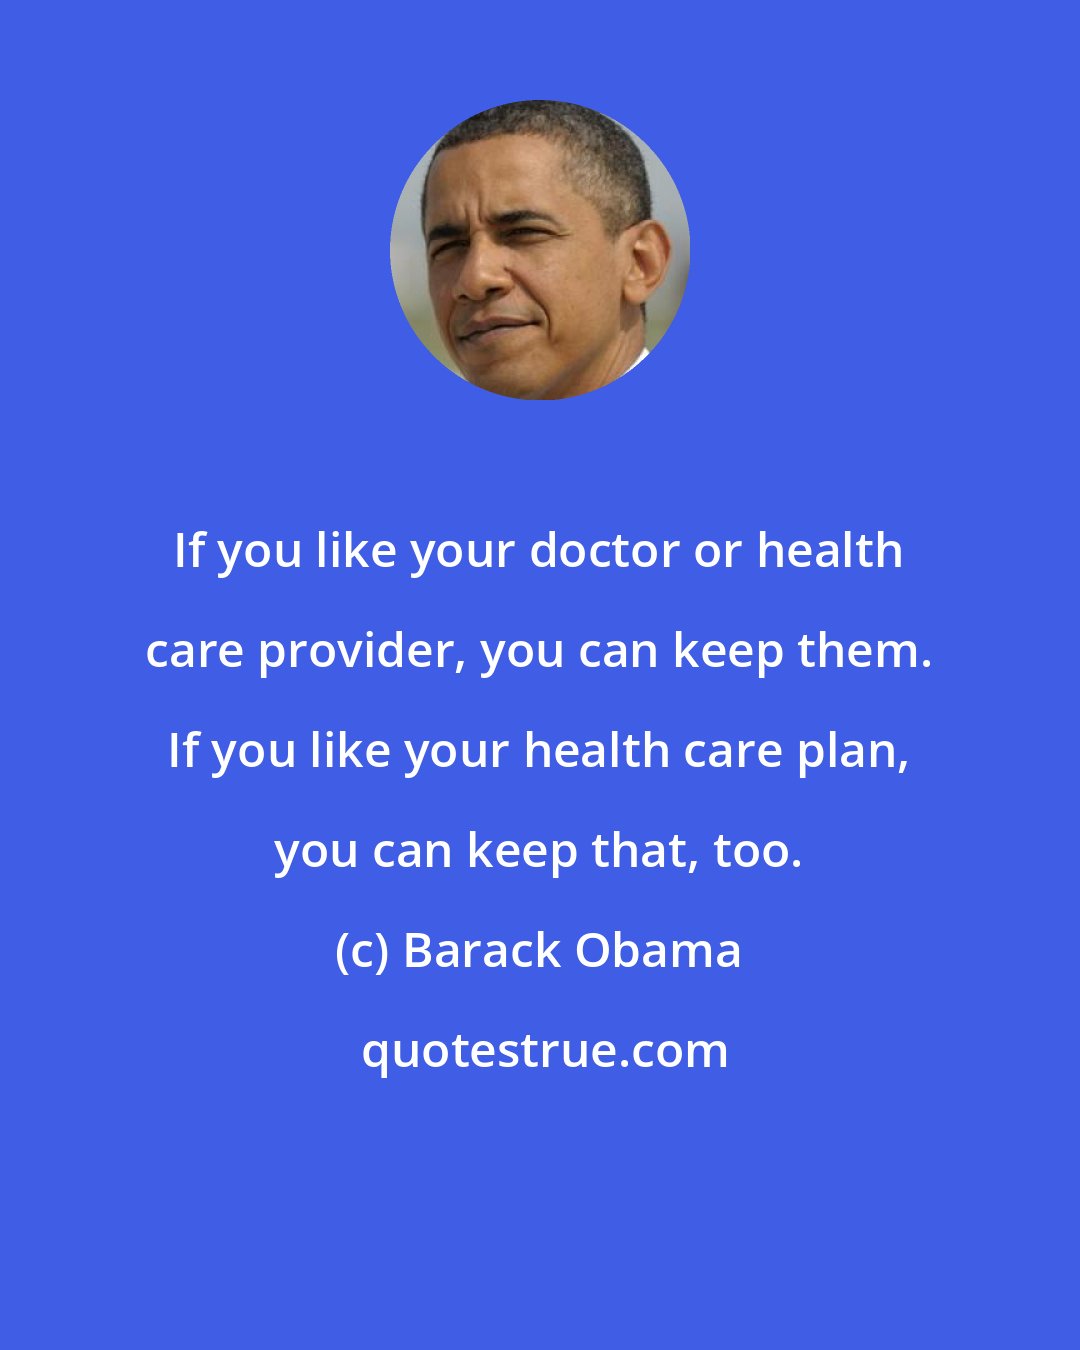 Barack Obama: If you like your doctor or health care provider, you can keep them. If you like your health care plan, you can keep that, too.